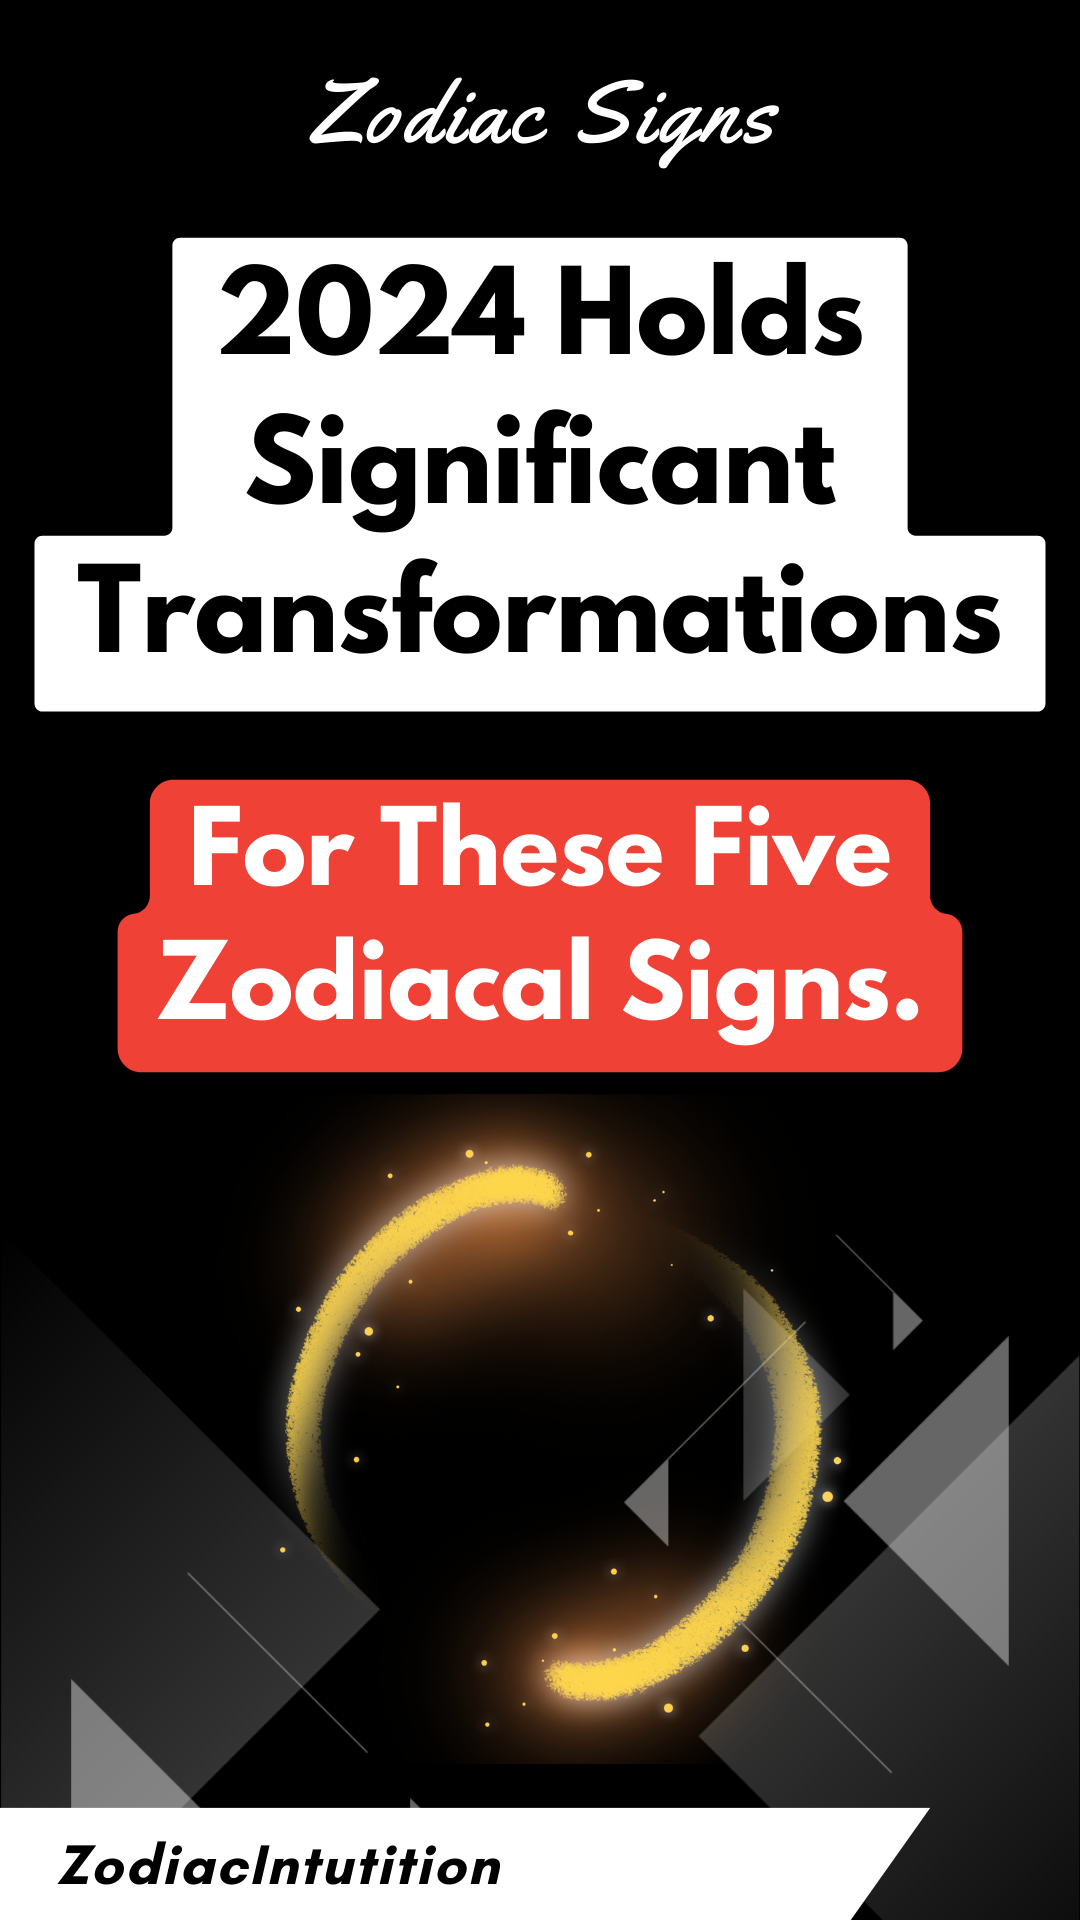 2024 Holds Significant Transformations for These Five Zodiacal Signs.